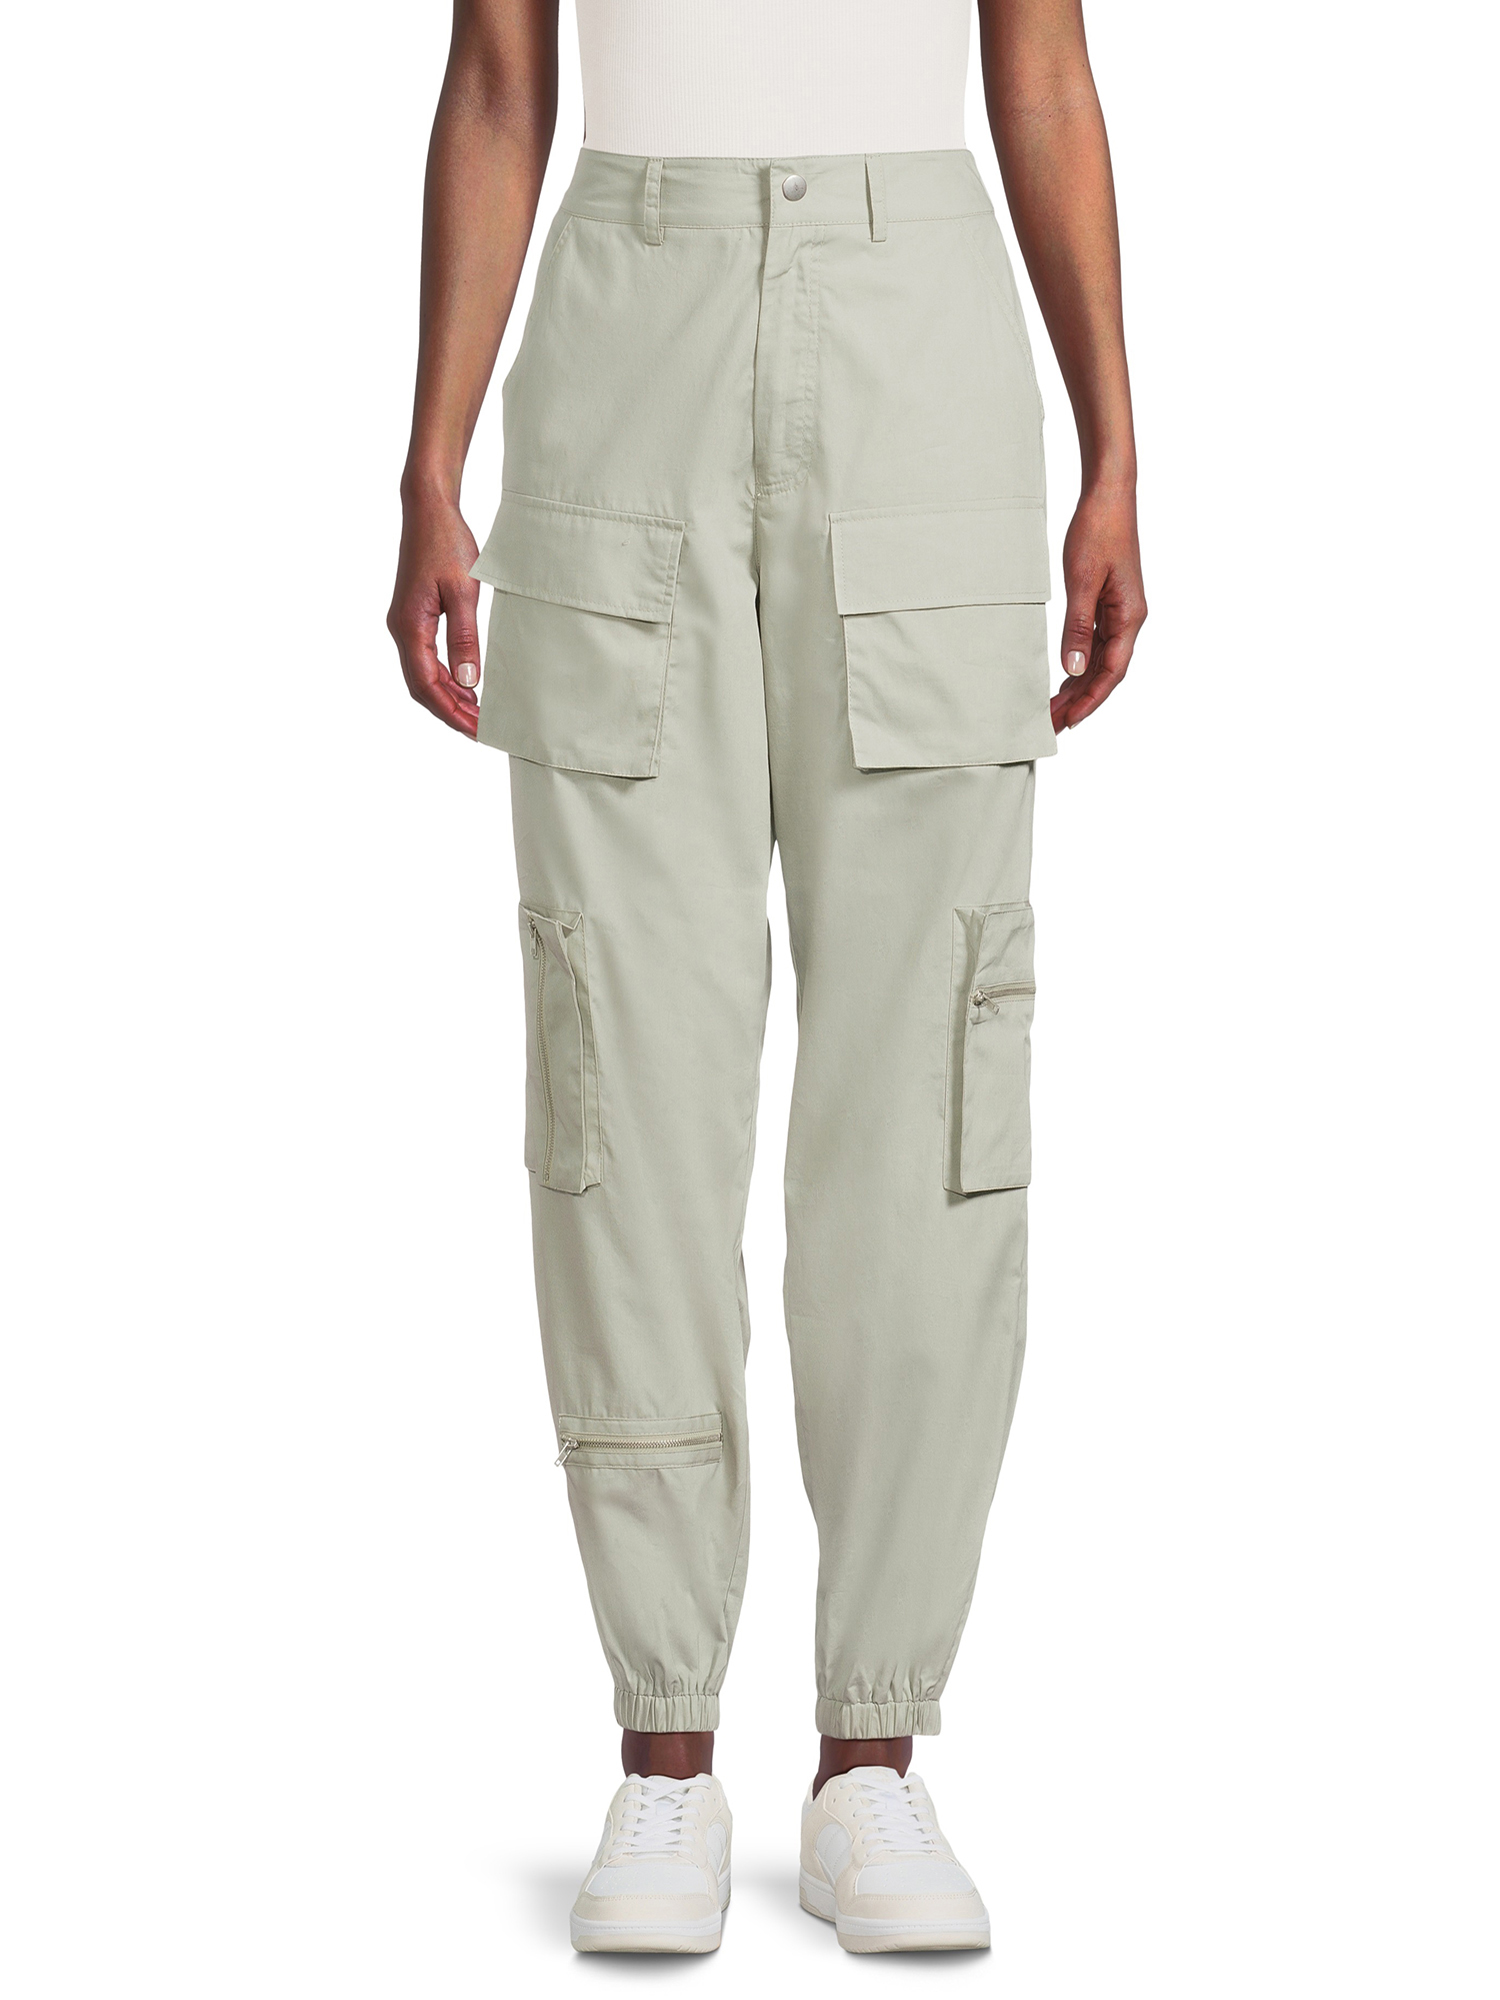 Liv & Lottie Juniors Cargo Pants with Zippers, Sizes S-XL - image 1 of 5